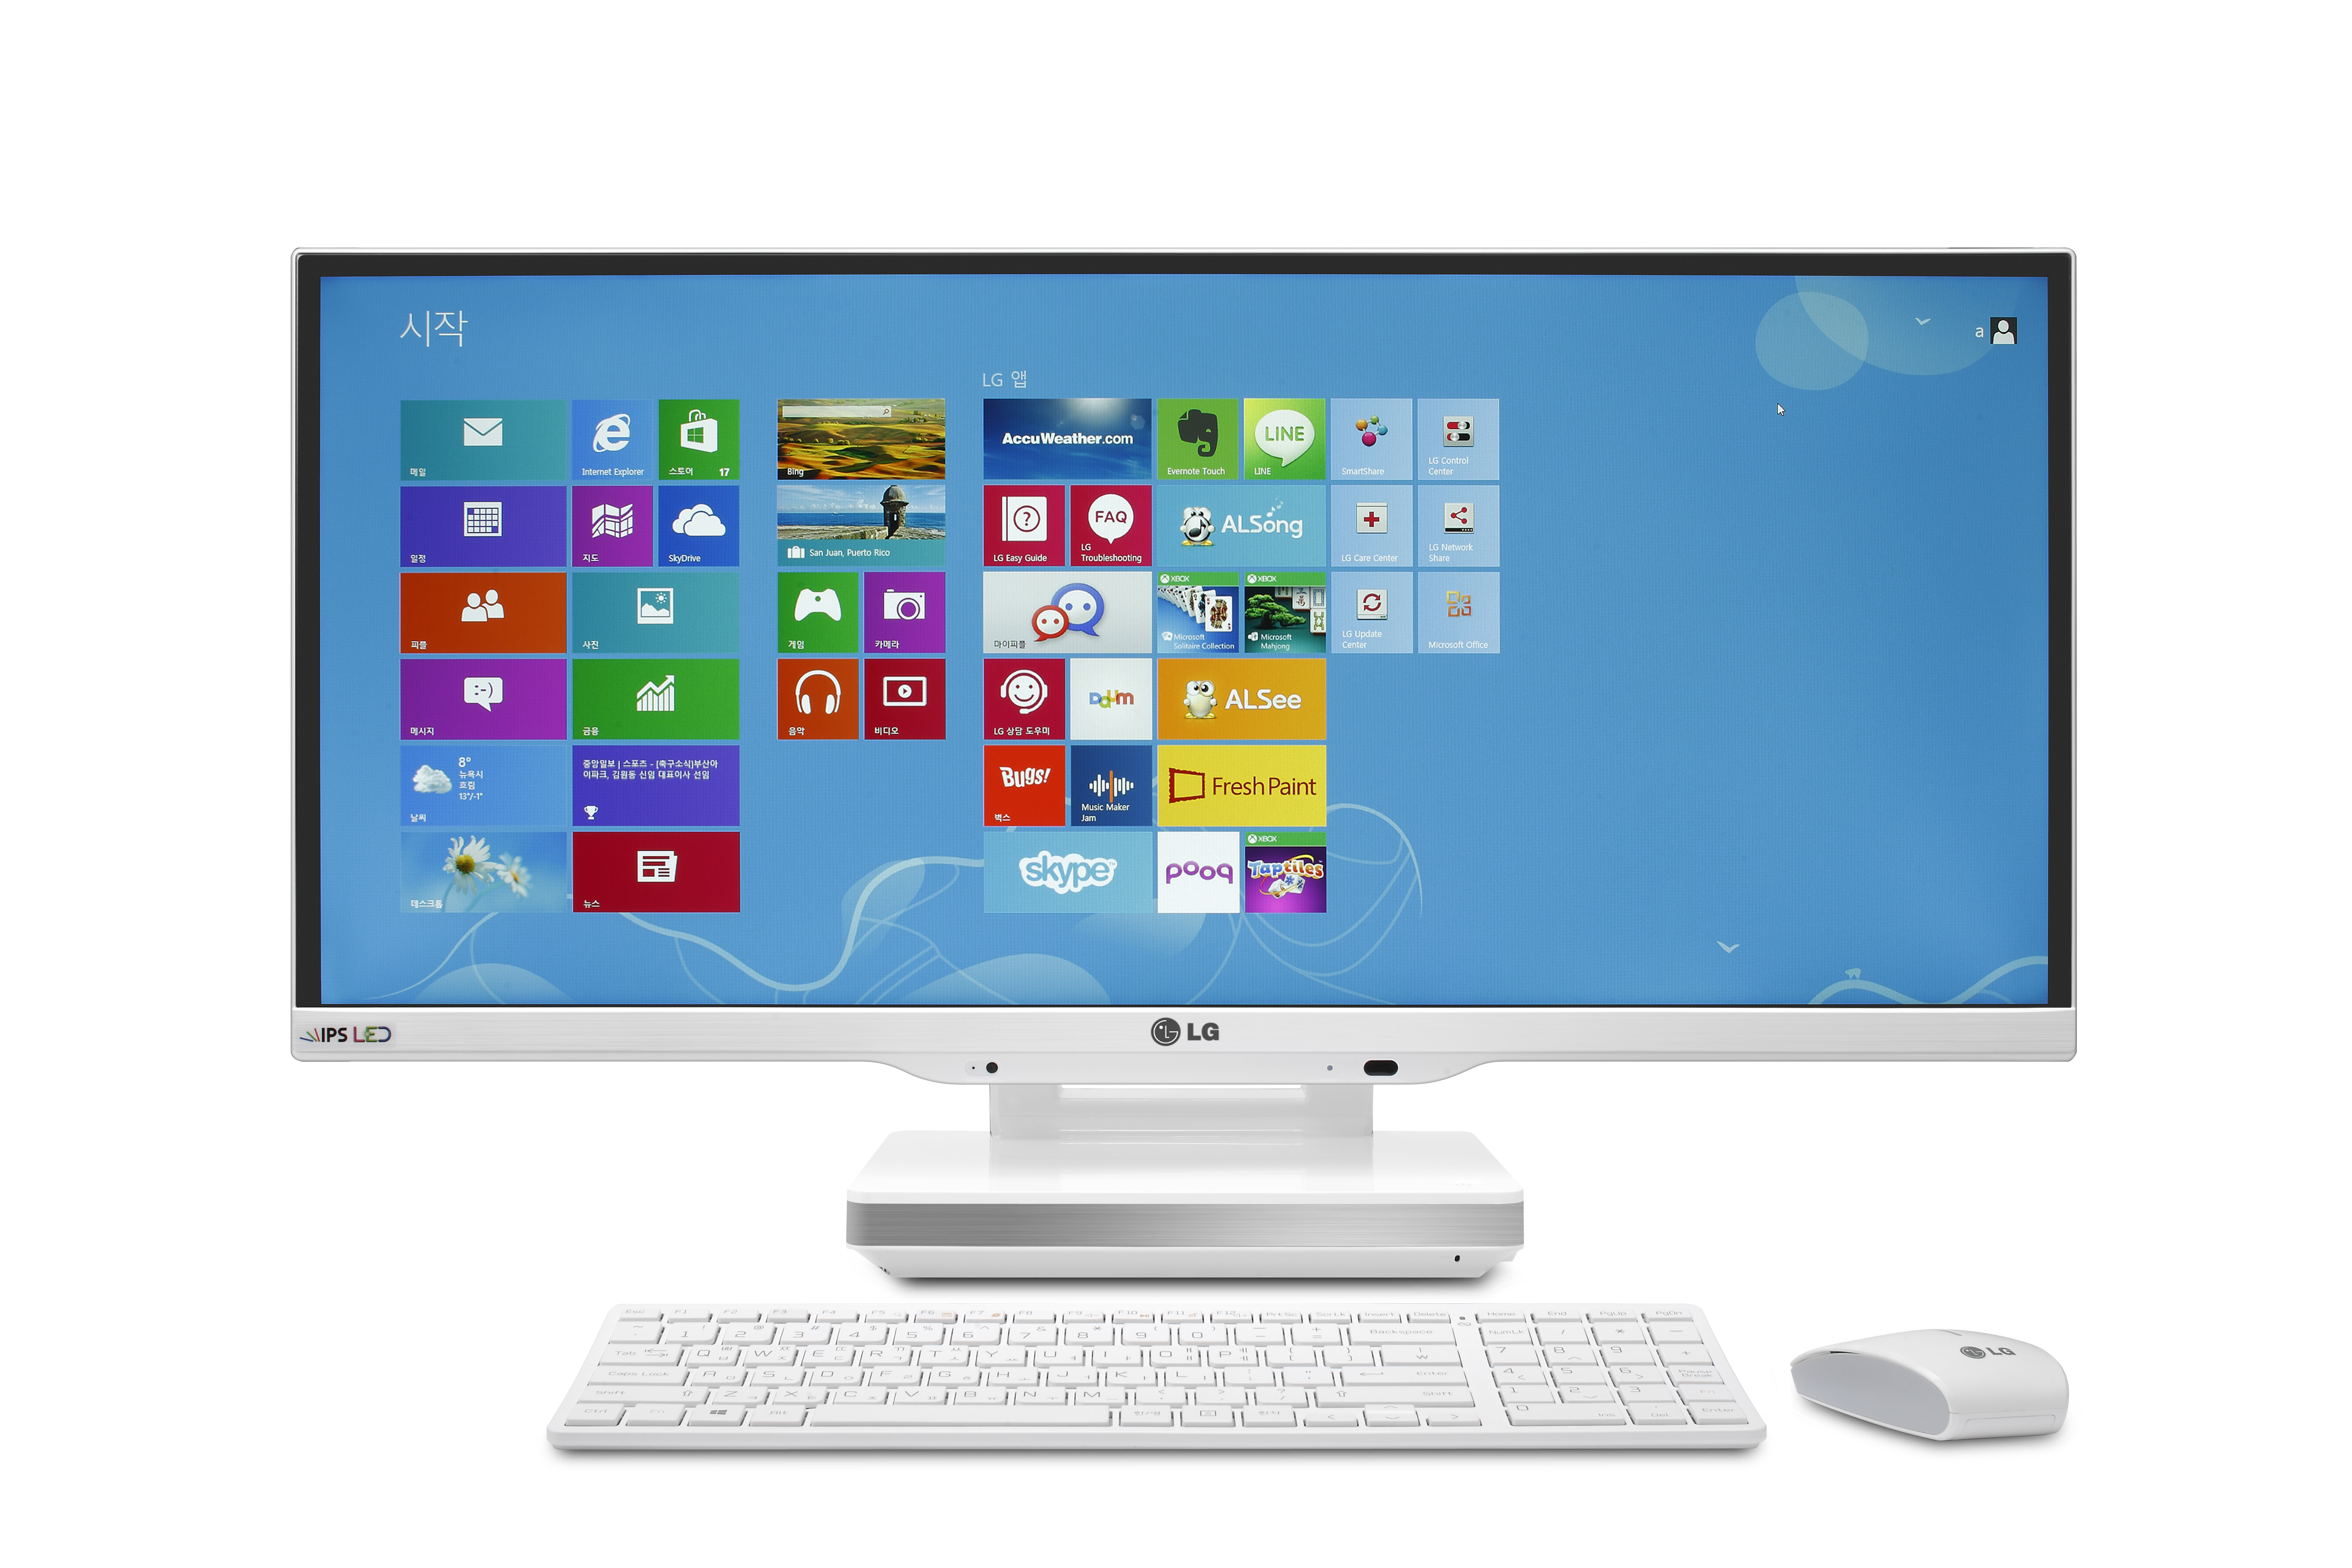 Front view of the LG IPS 21:9 UltraWide All-In-One PC Model V960